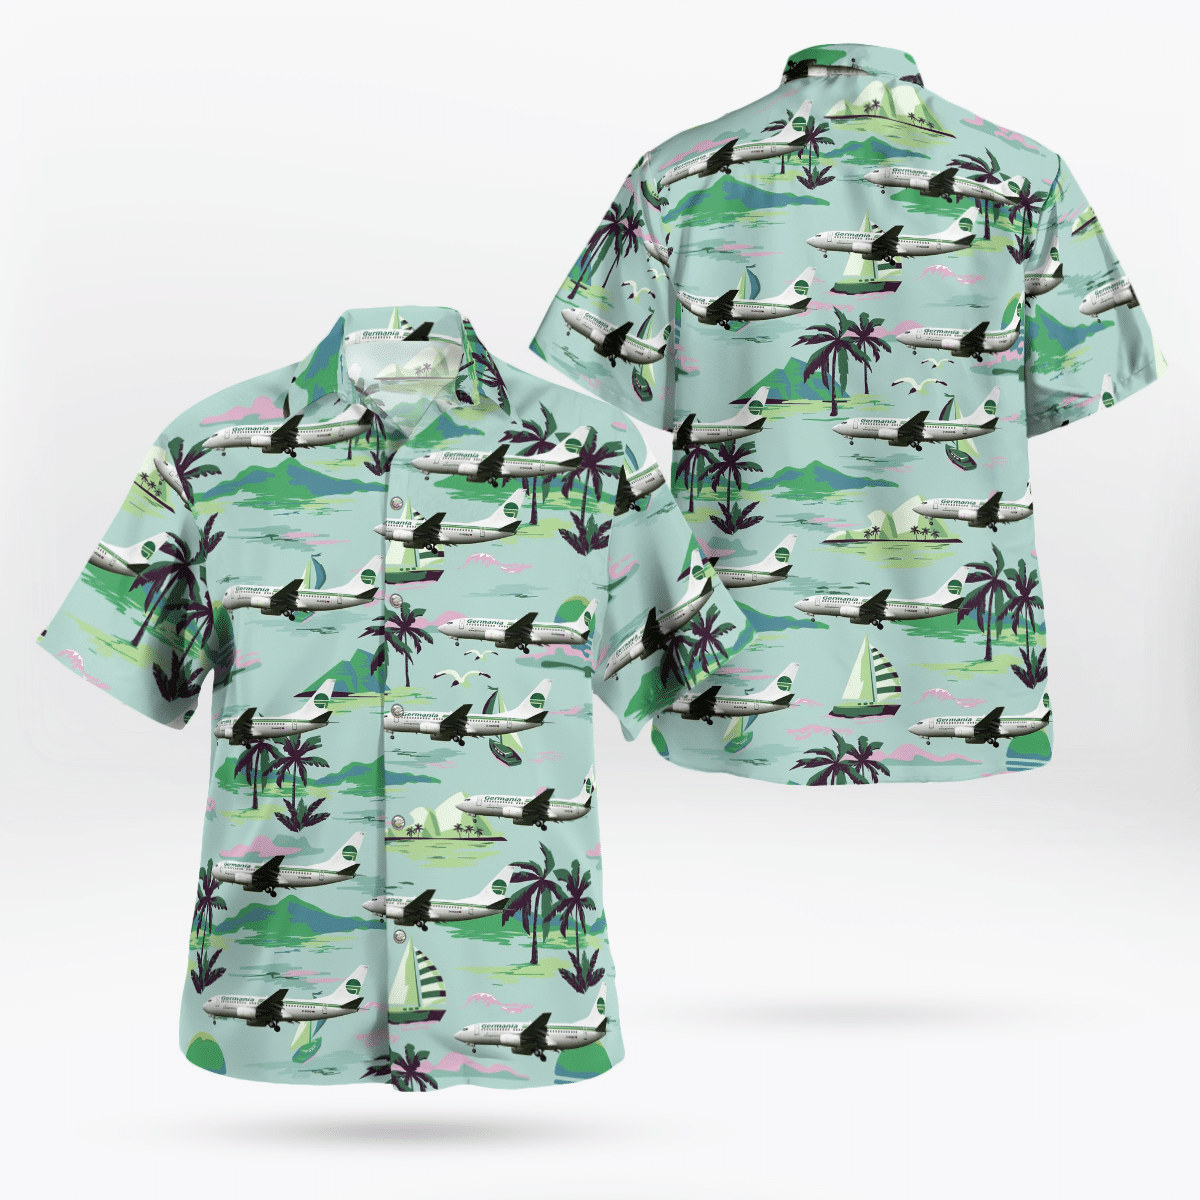 HOT Germania airline Boeing 737-700 Tropical Shirt2